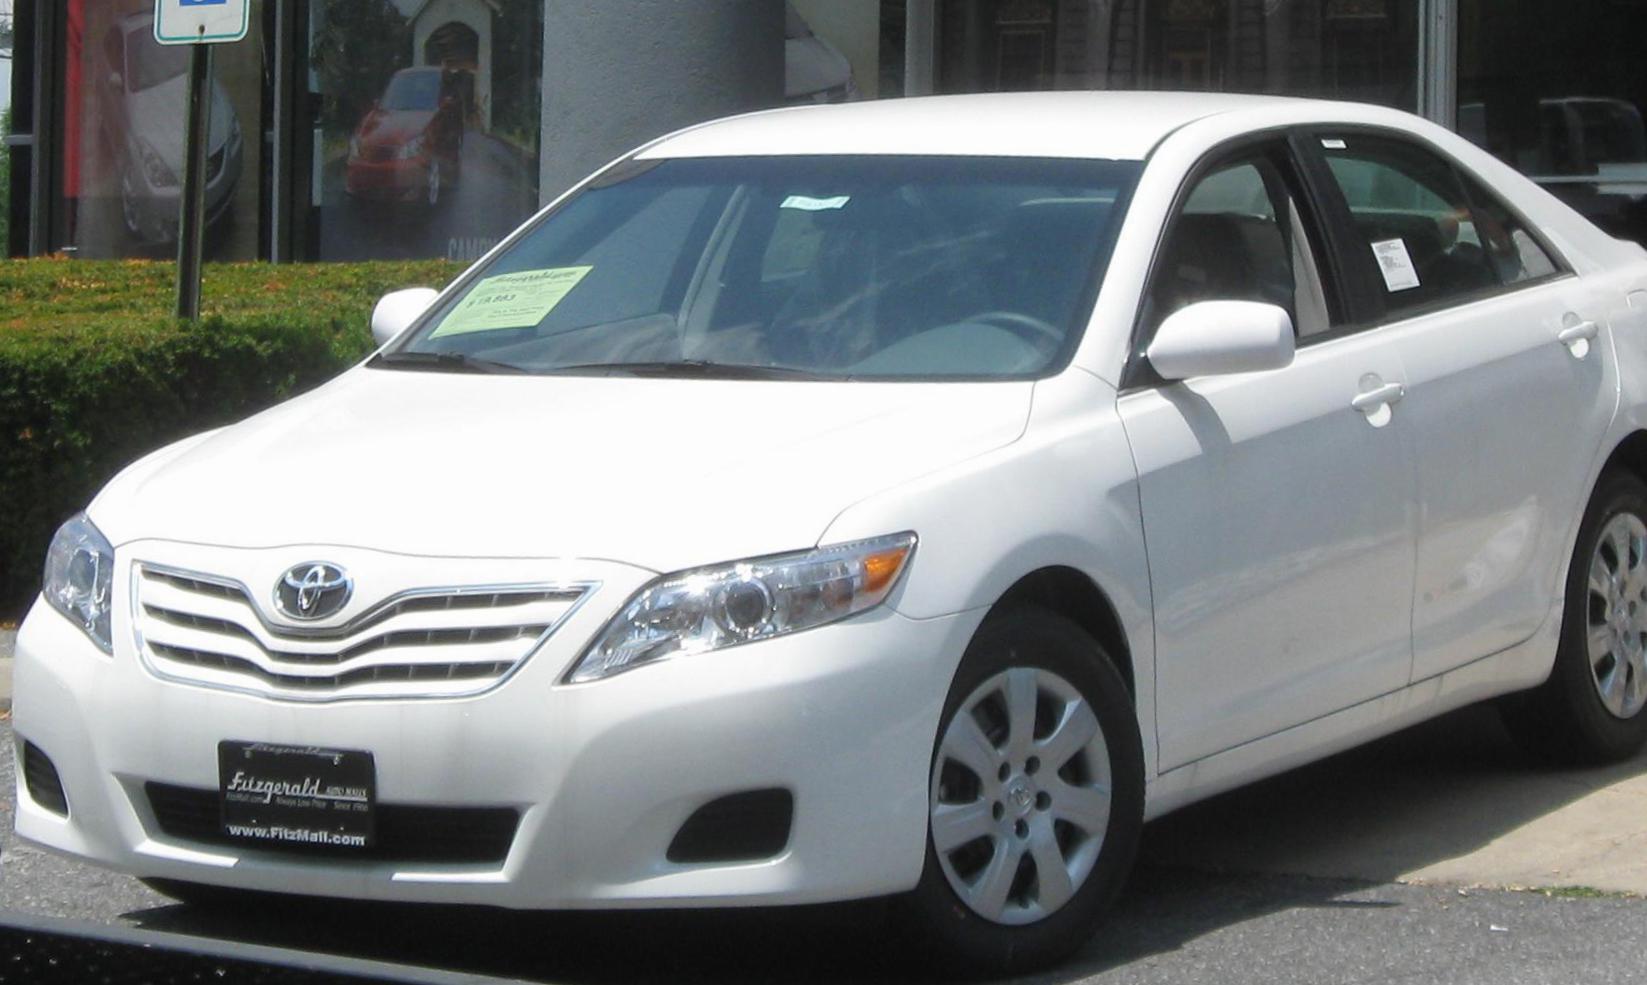 Camry Toyota models 2010